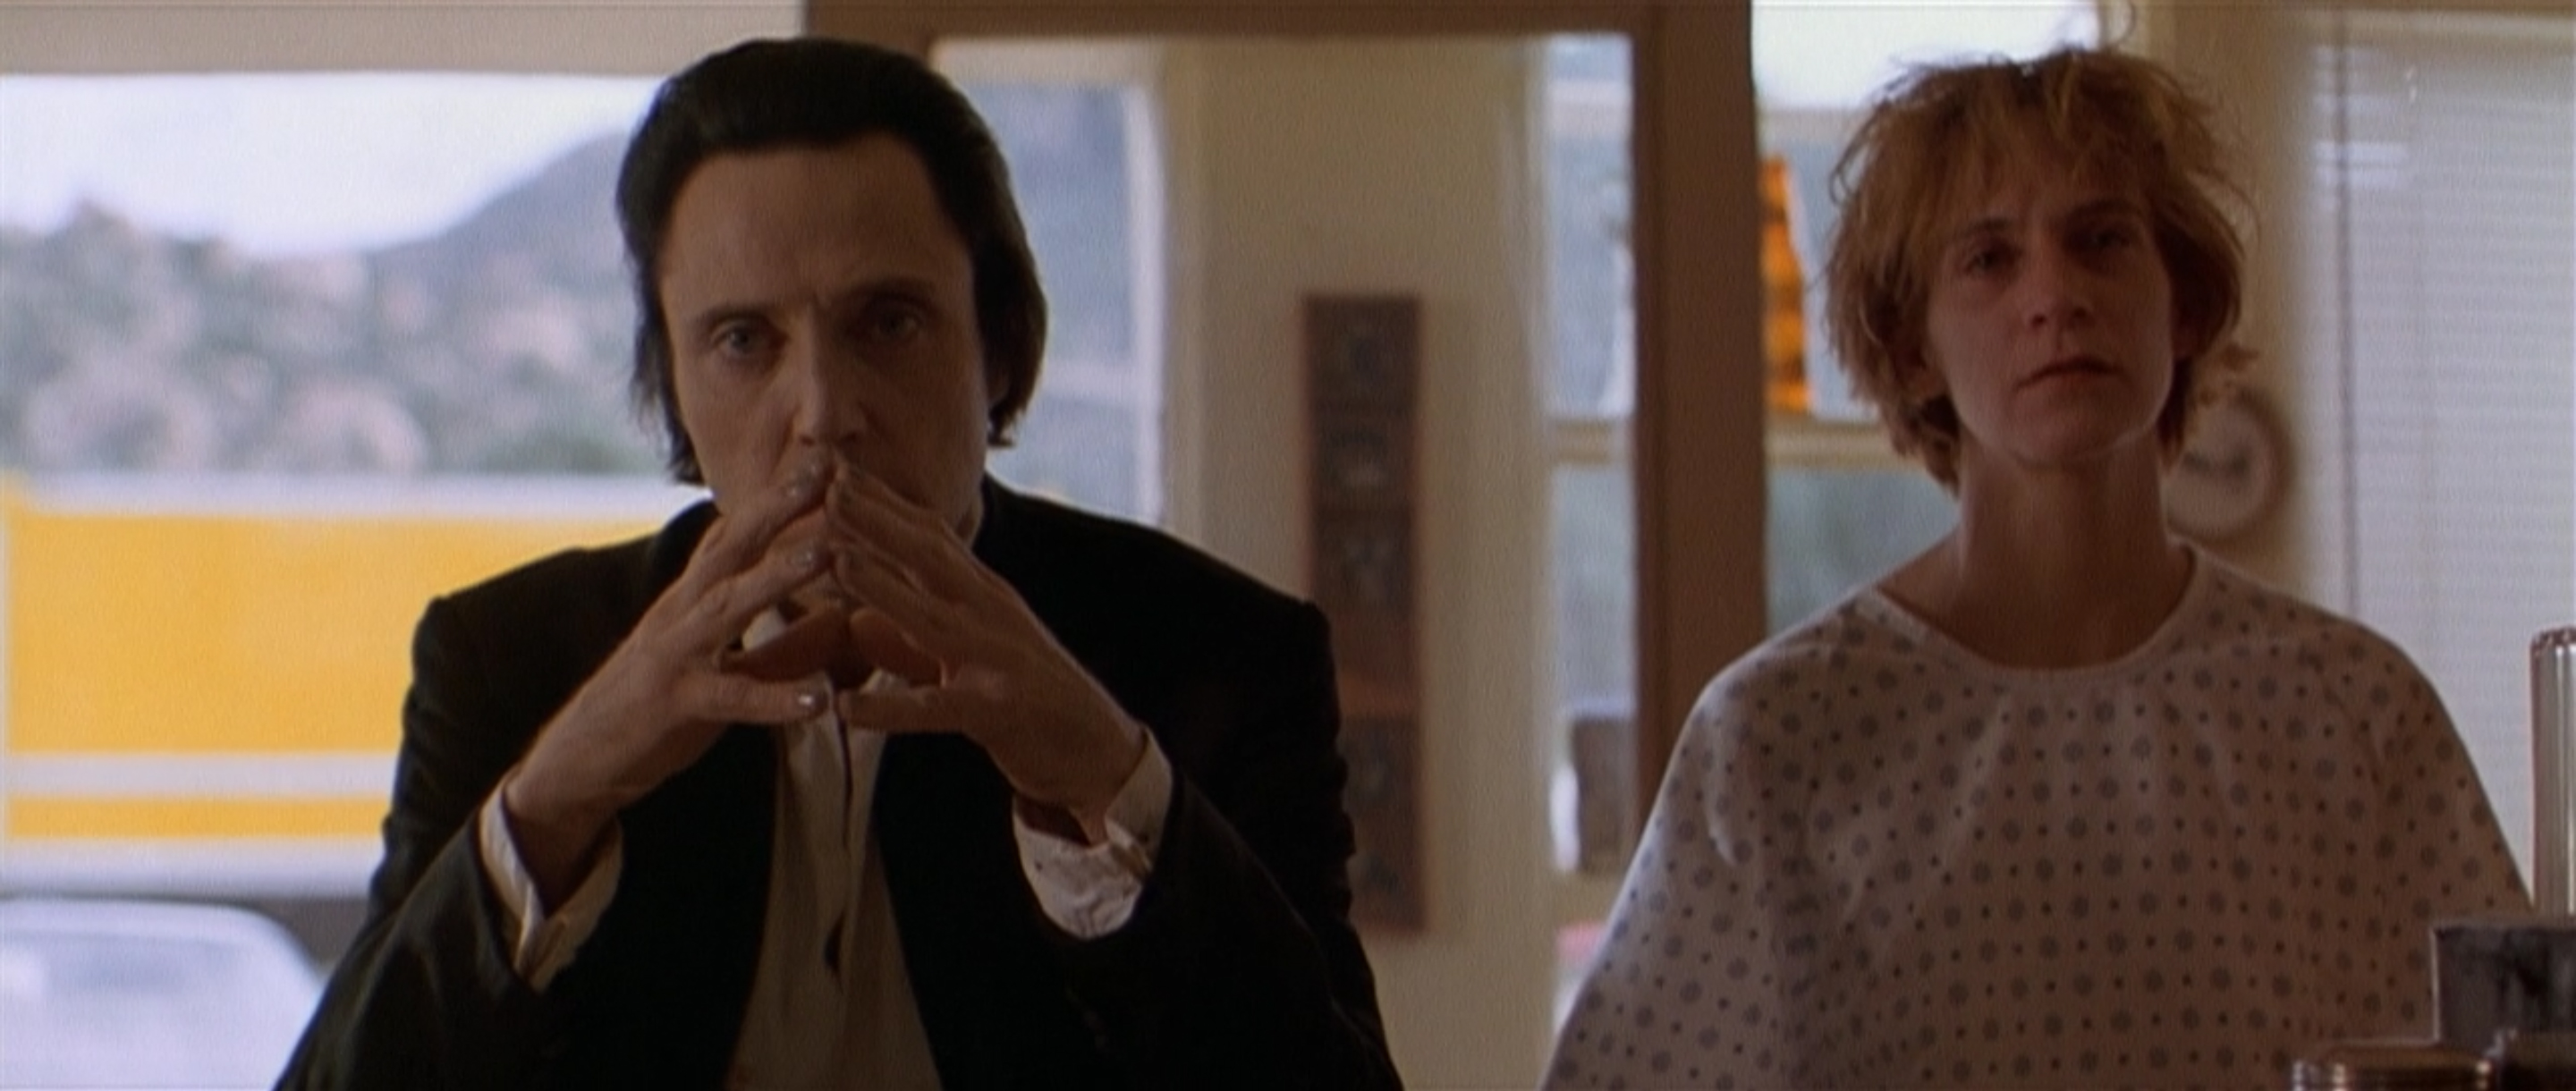 Christopher Walken as the archangel Gabriel and Amanda Plummer in The Prophecy, 1995